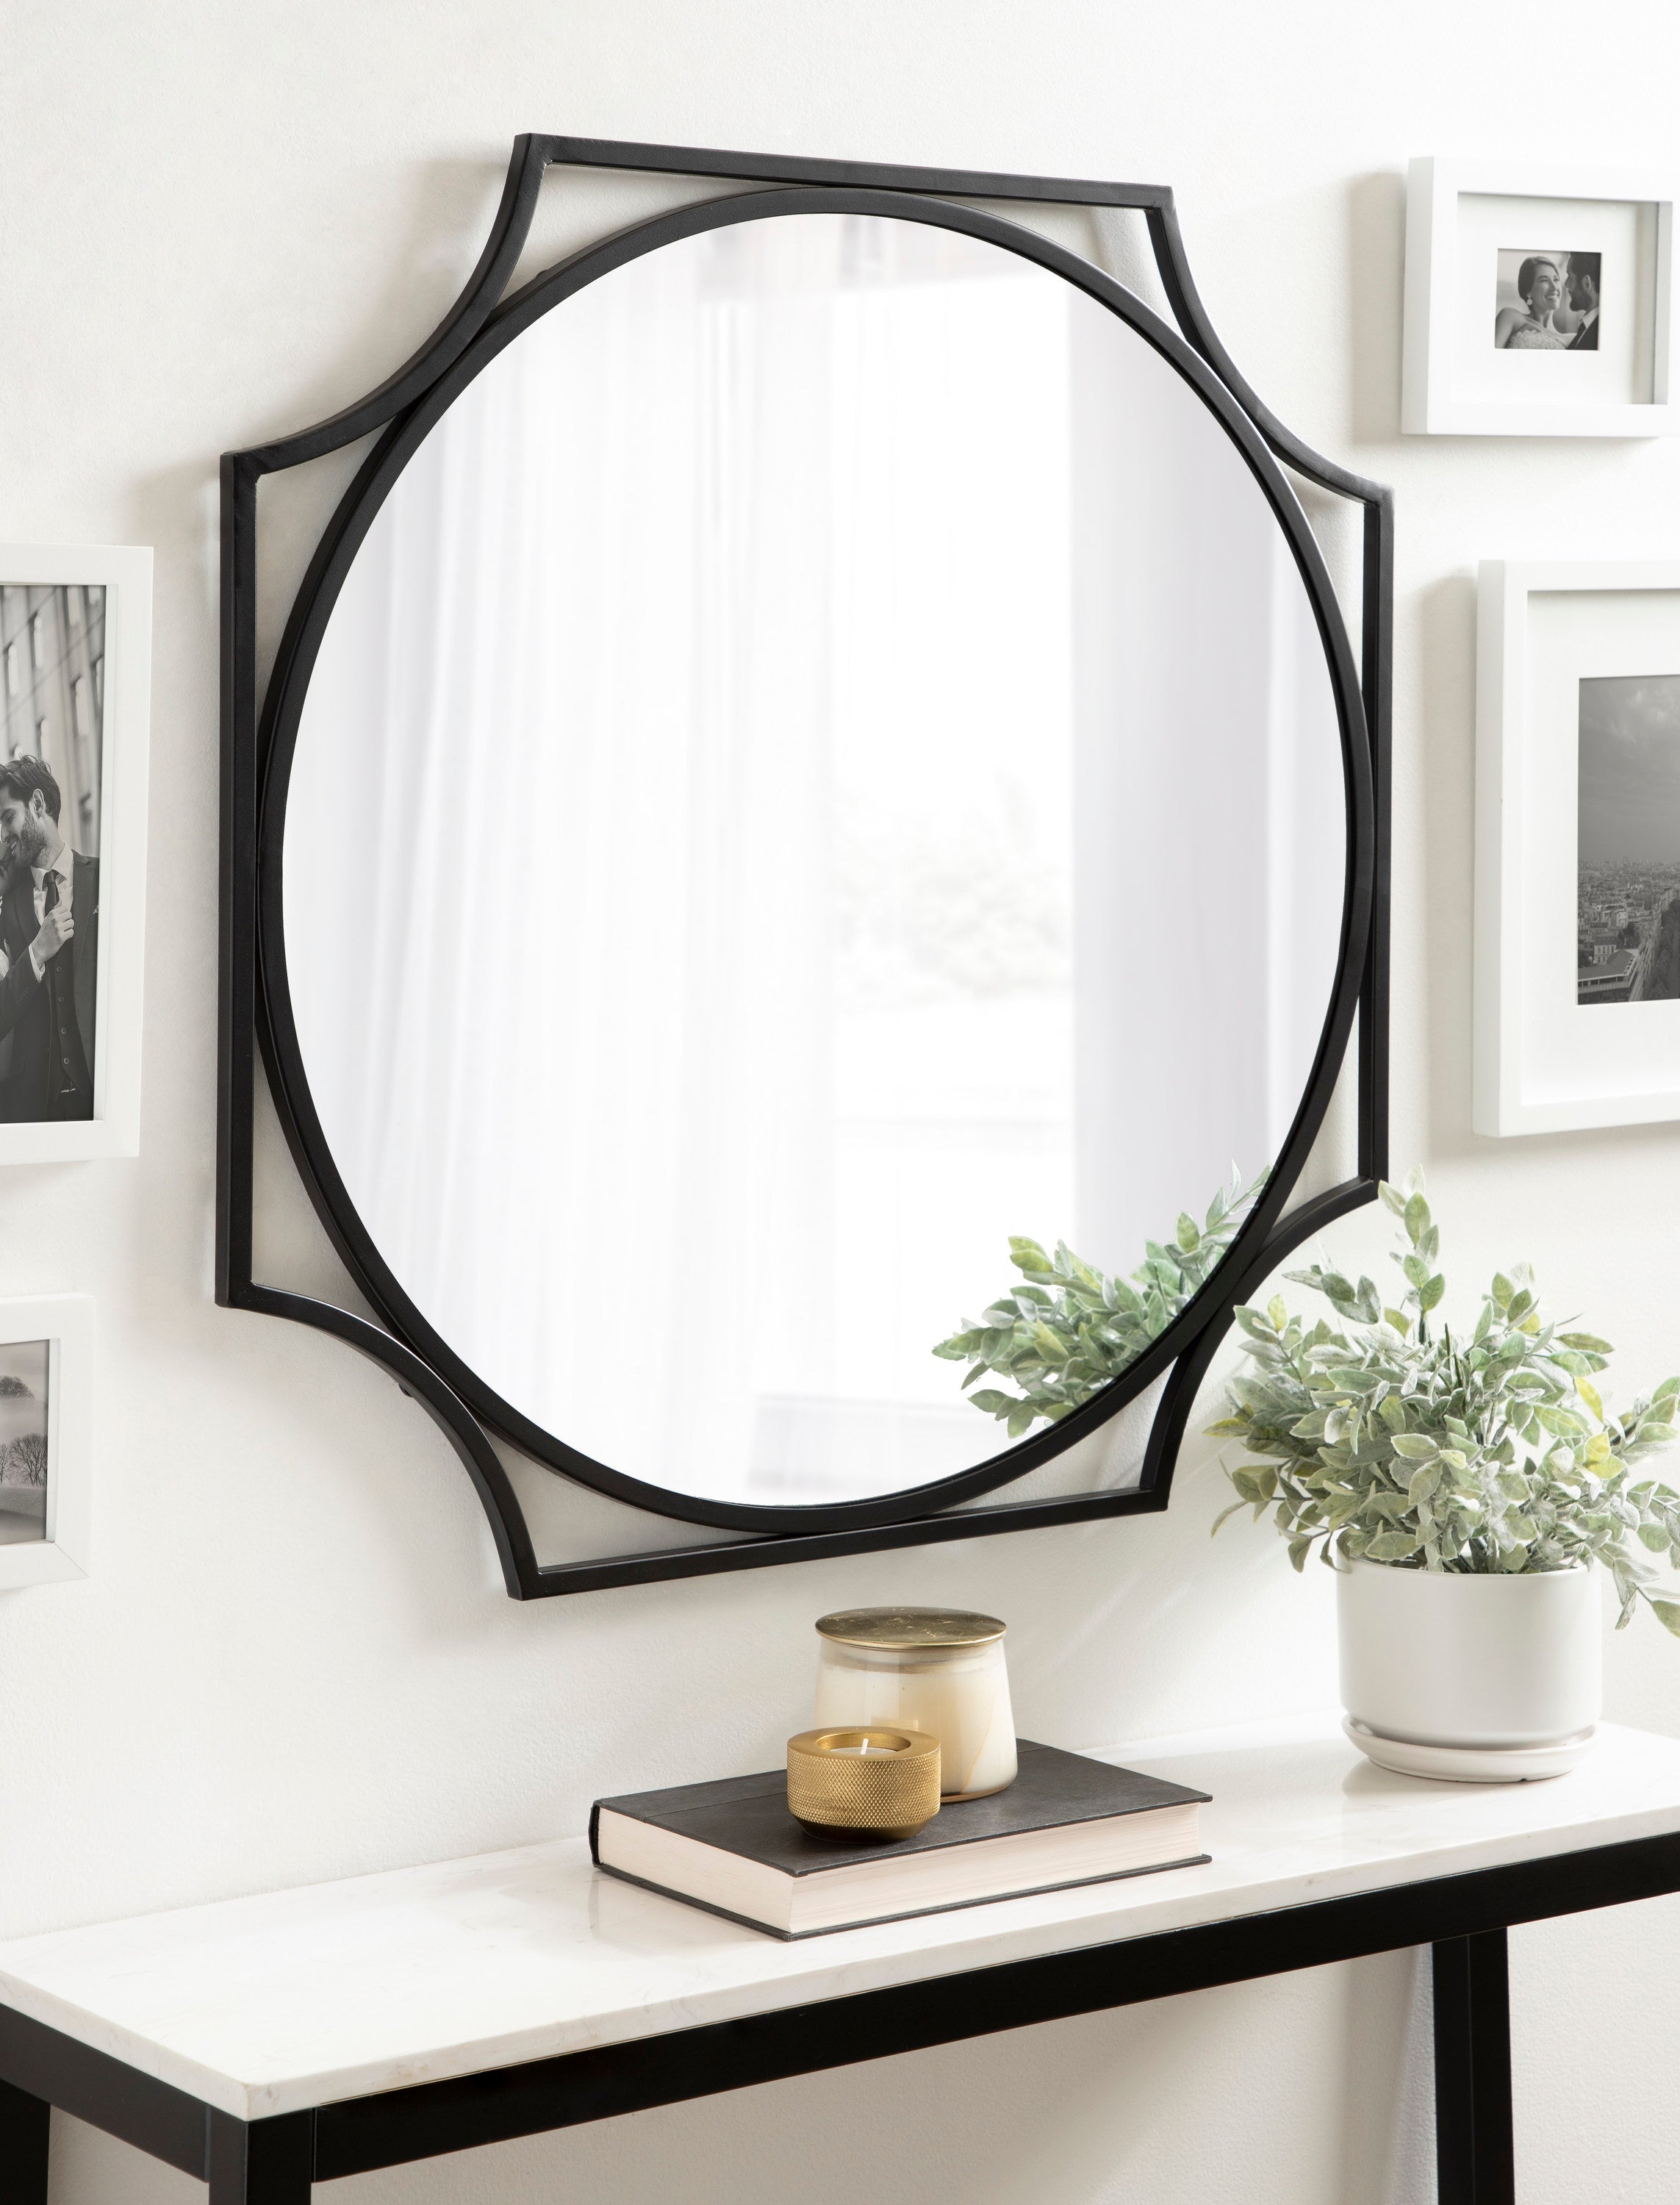 Rateau Scalloped Wall Mirror